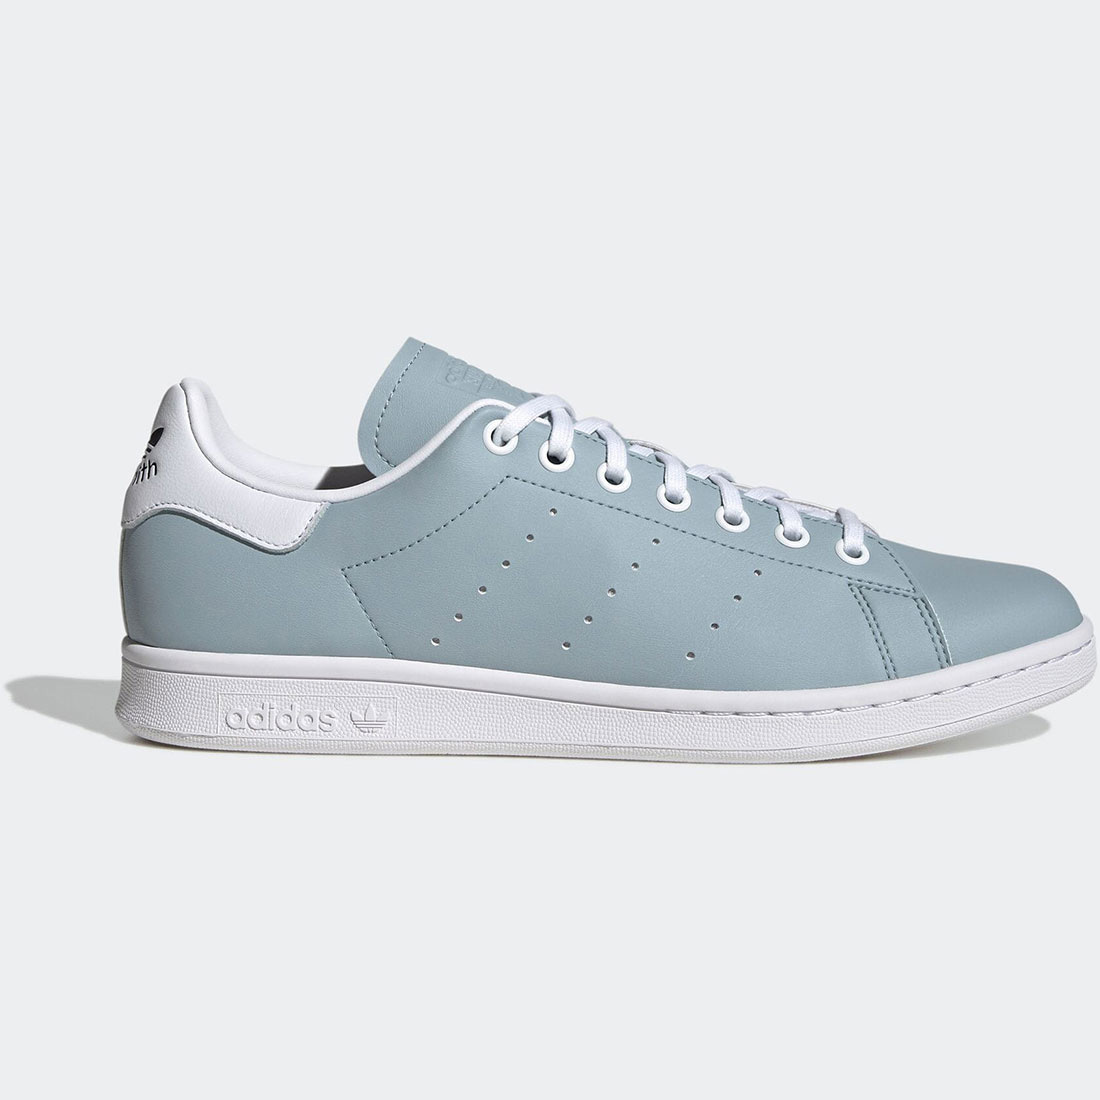  Adidas 26.5cm view ti& Youth Stansmith gray white tax included regular price 14300 jpy adidas BEAUTY&YOUTH STAN SMITH BY ①